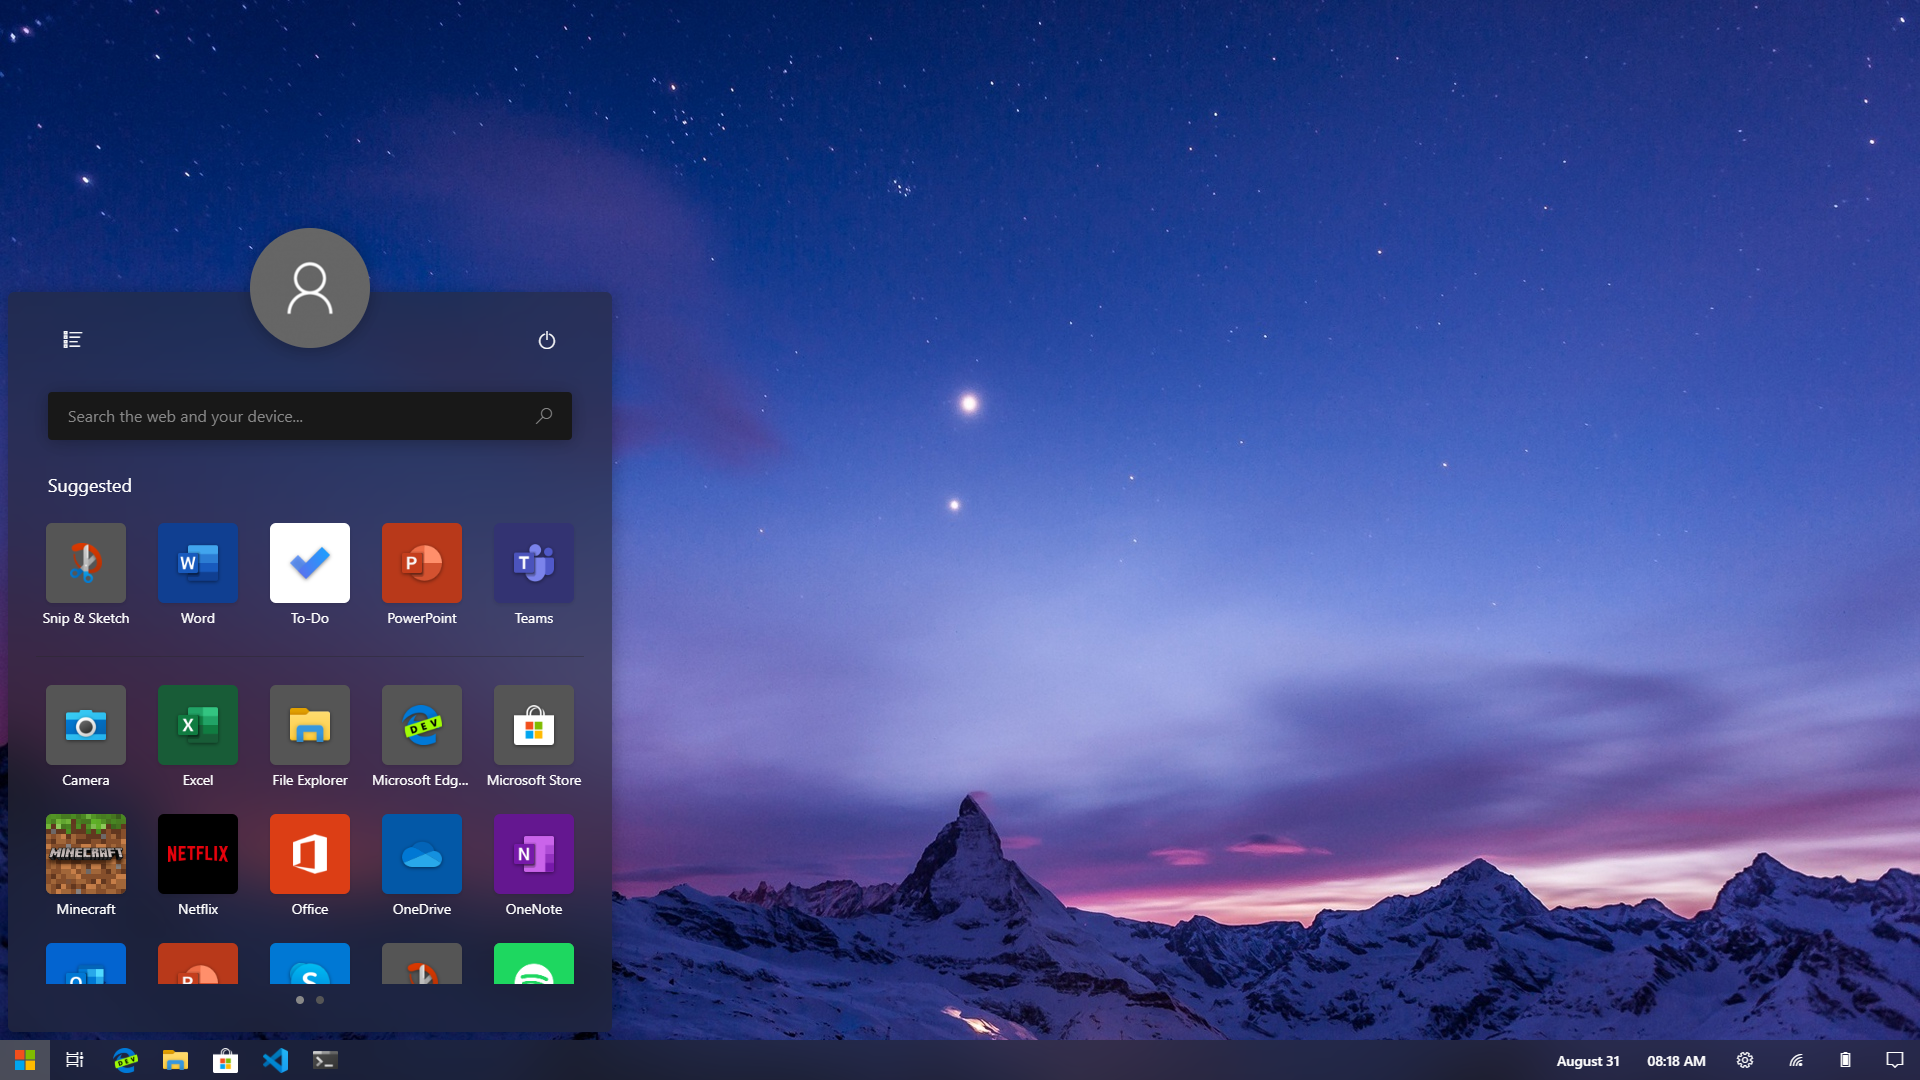 Redesigned windows 10 start menu looks better than the real one 527246 2